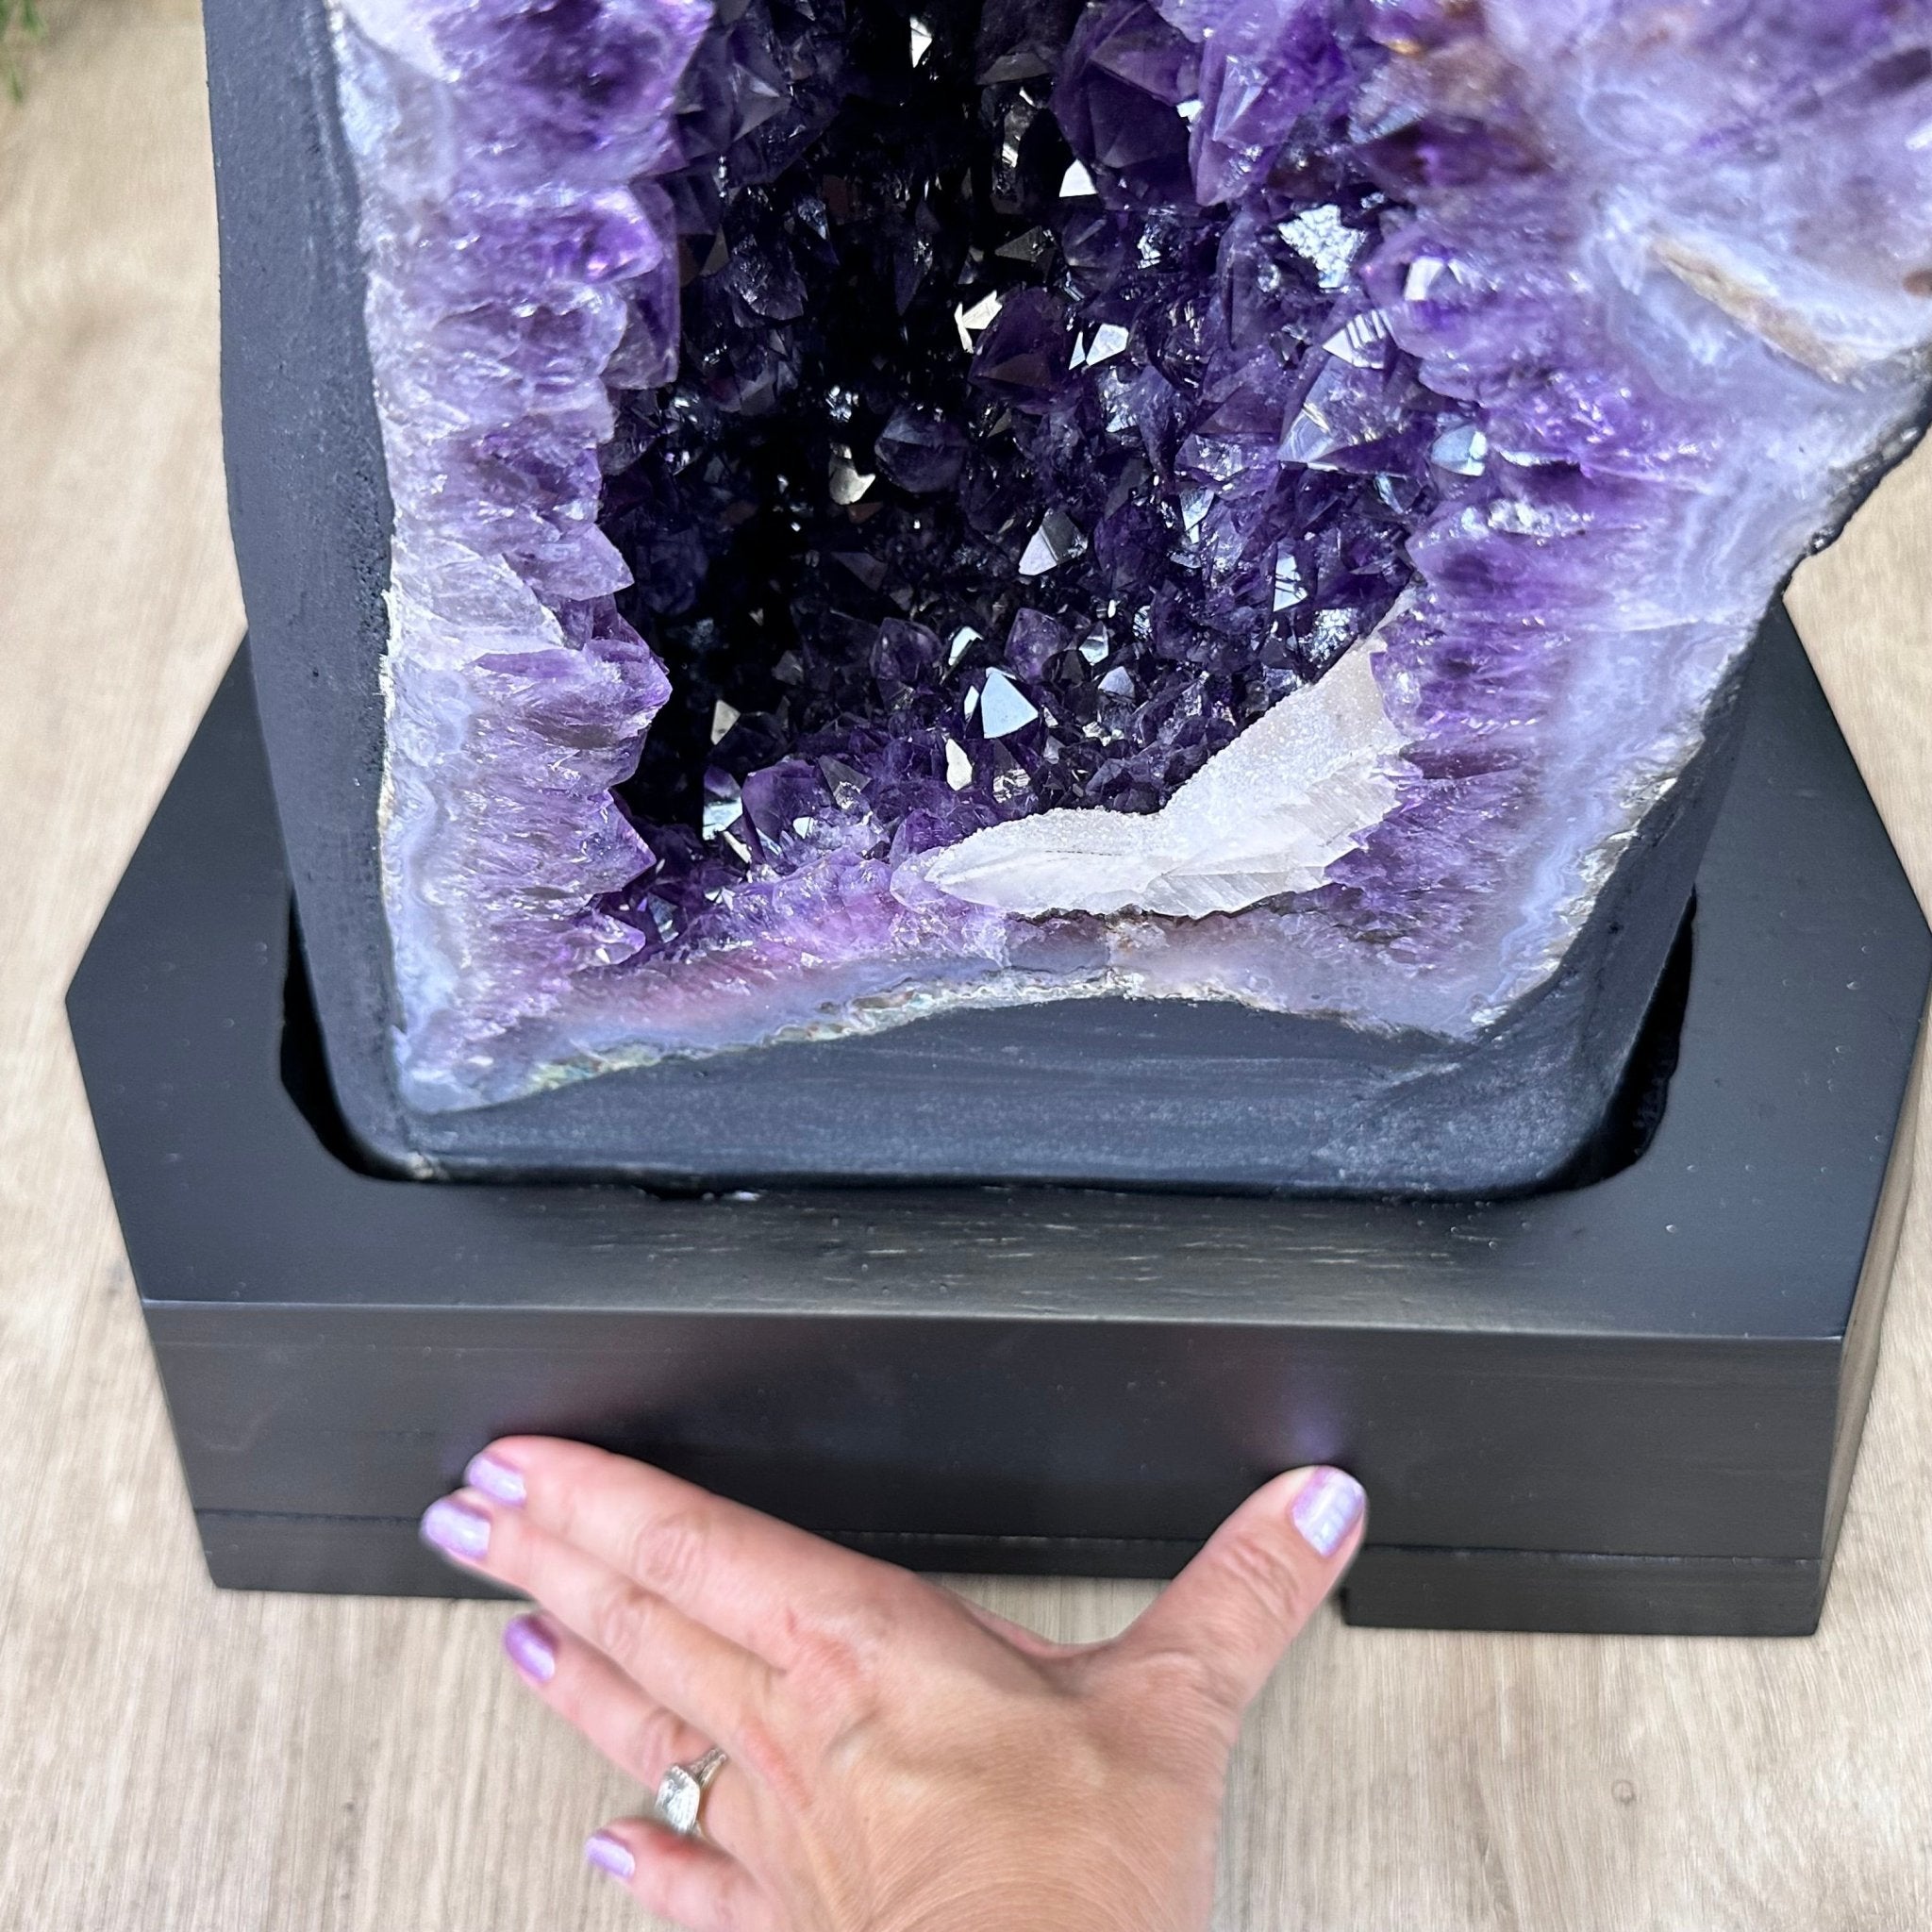 Large Extra Plus Quality Brazilian Amethyst Cathedral, 137 lbs & 69" Tall #5601-1333 - Brazil GemsBrazil GemsLarge Extra Plus Quality Brazilian Amethyst Cathedral, 137 lbs & 69" Tall #5601-1333Cathedrals5601-1333